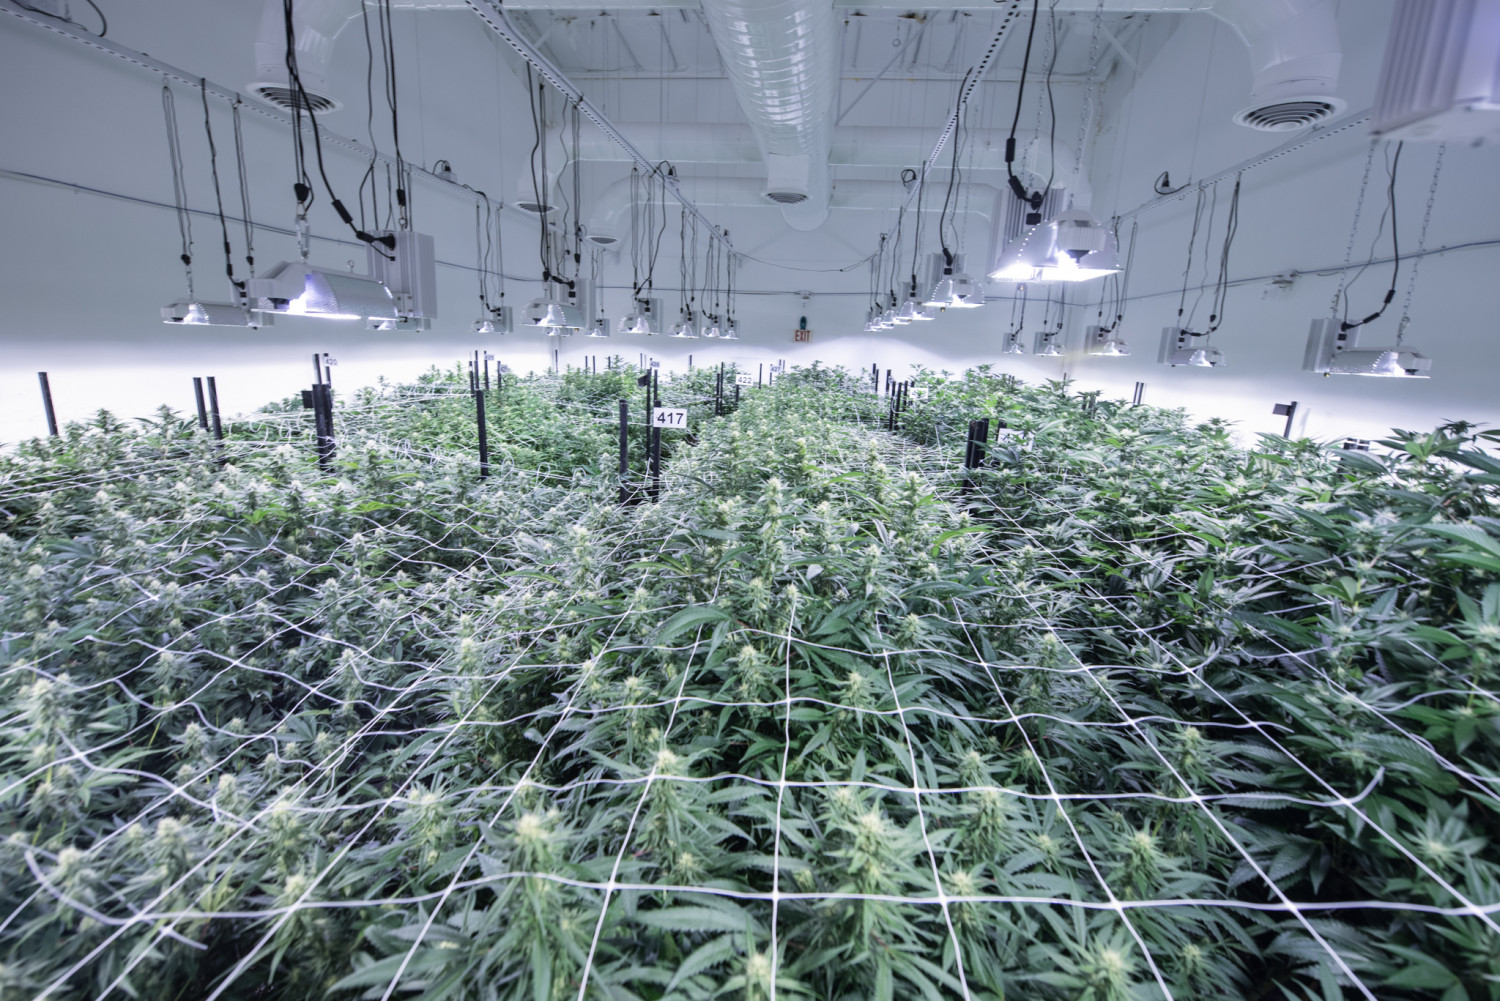 Cannabis Cultivation Facility Design: How To Build for Maximum Efficiency